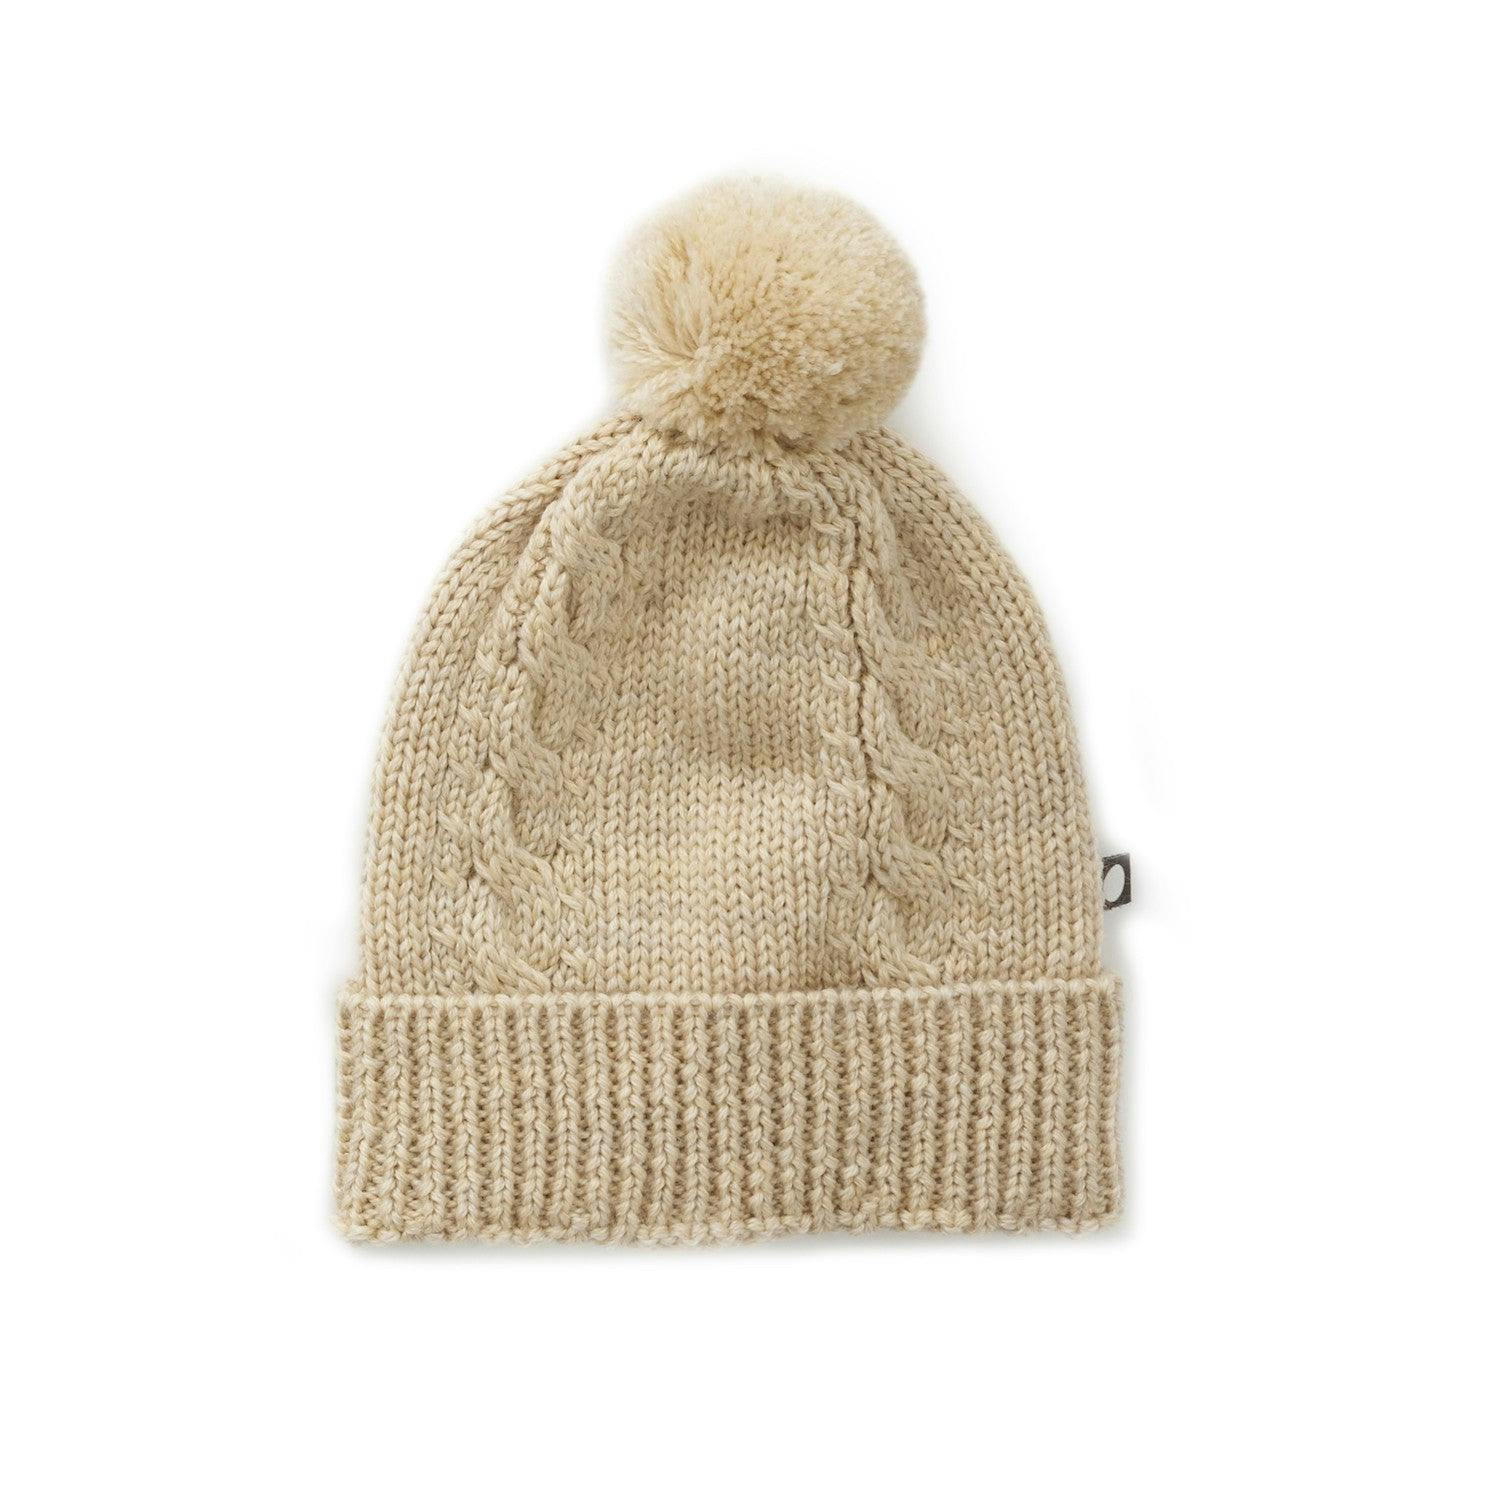 Oeuf Cable Knit Beanie Beige · 12/24 months